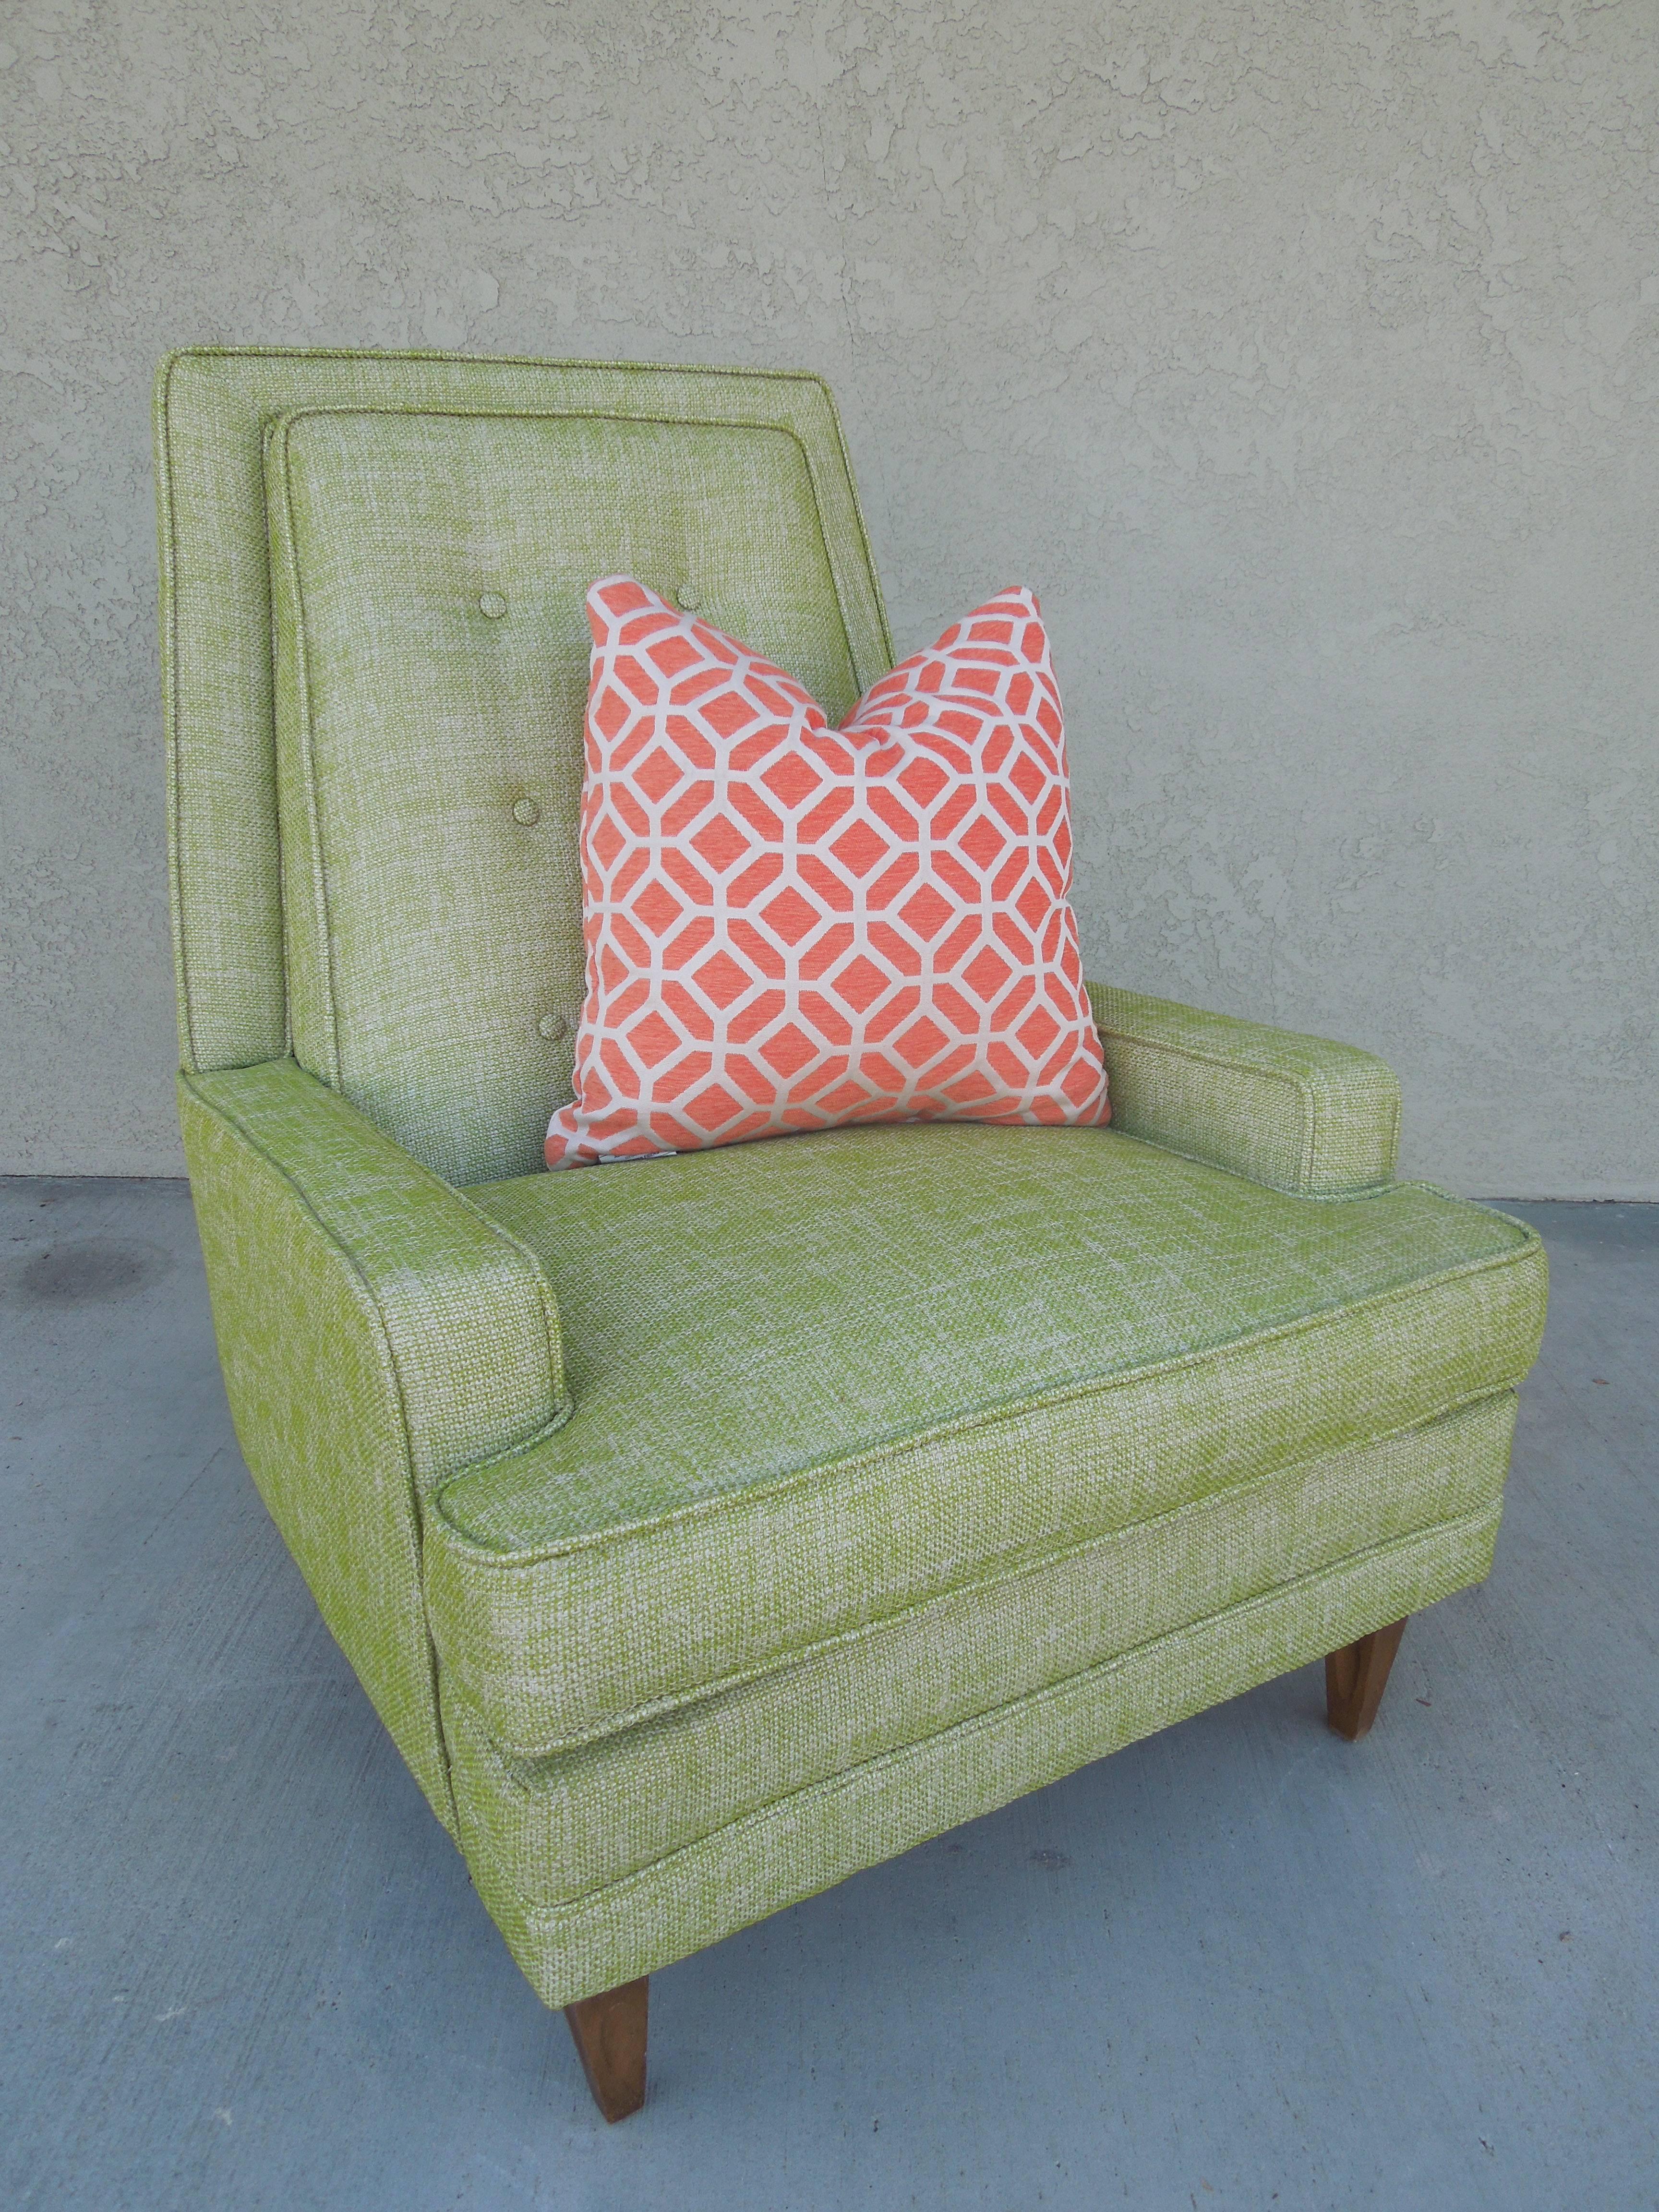 American 1960s Modern Tailored Armchair in New High End Lime Linen Tweed Fabric